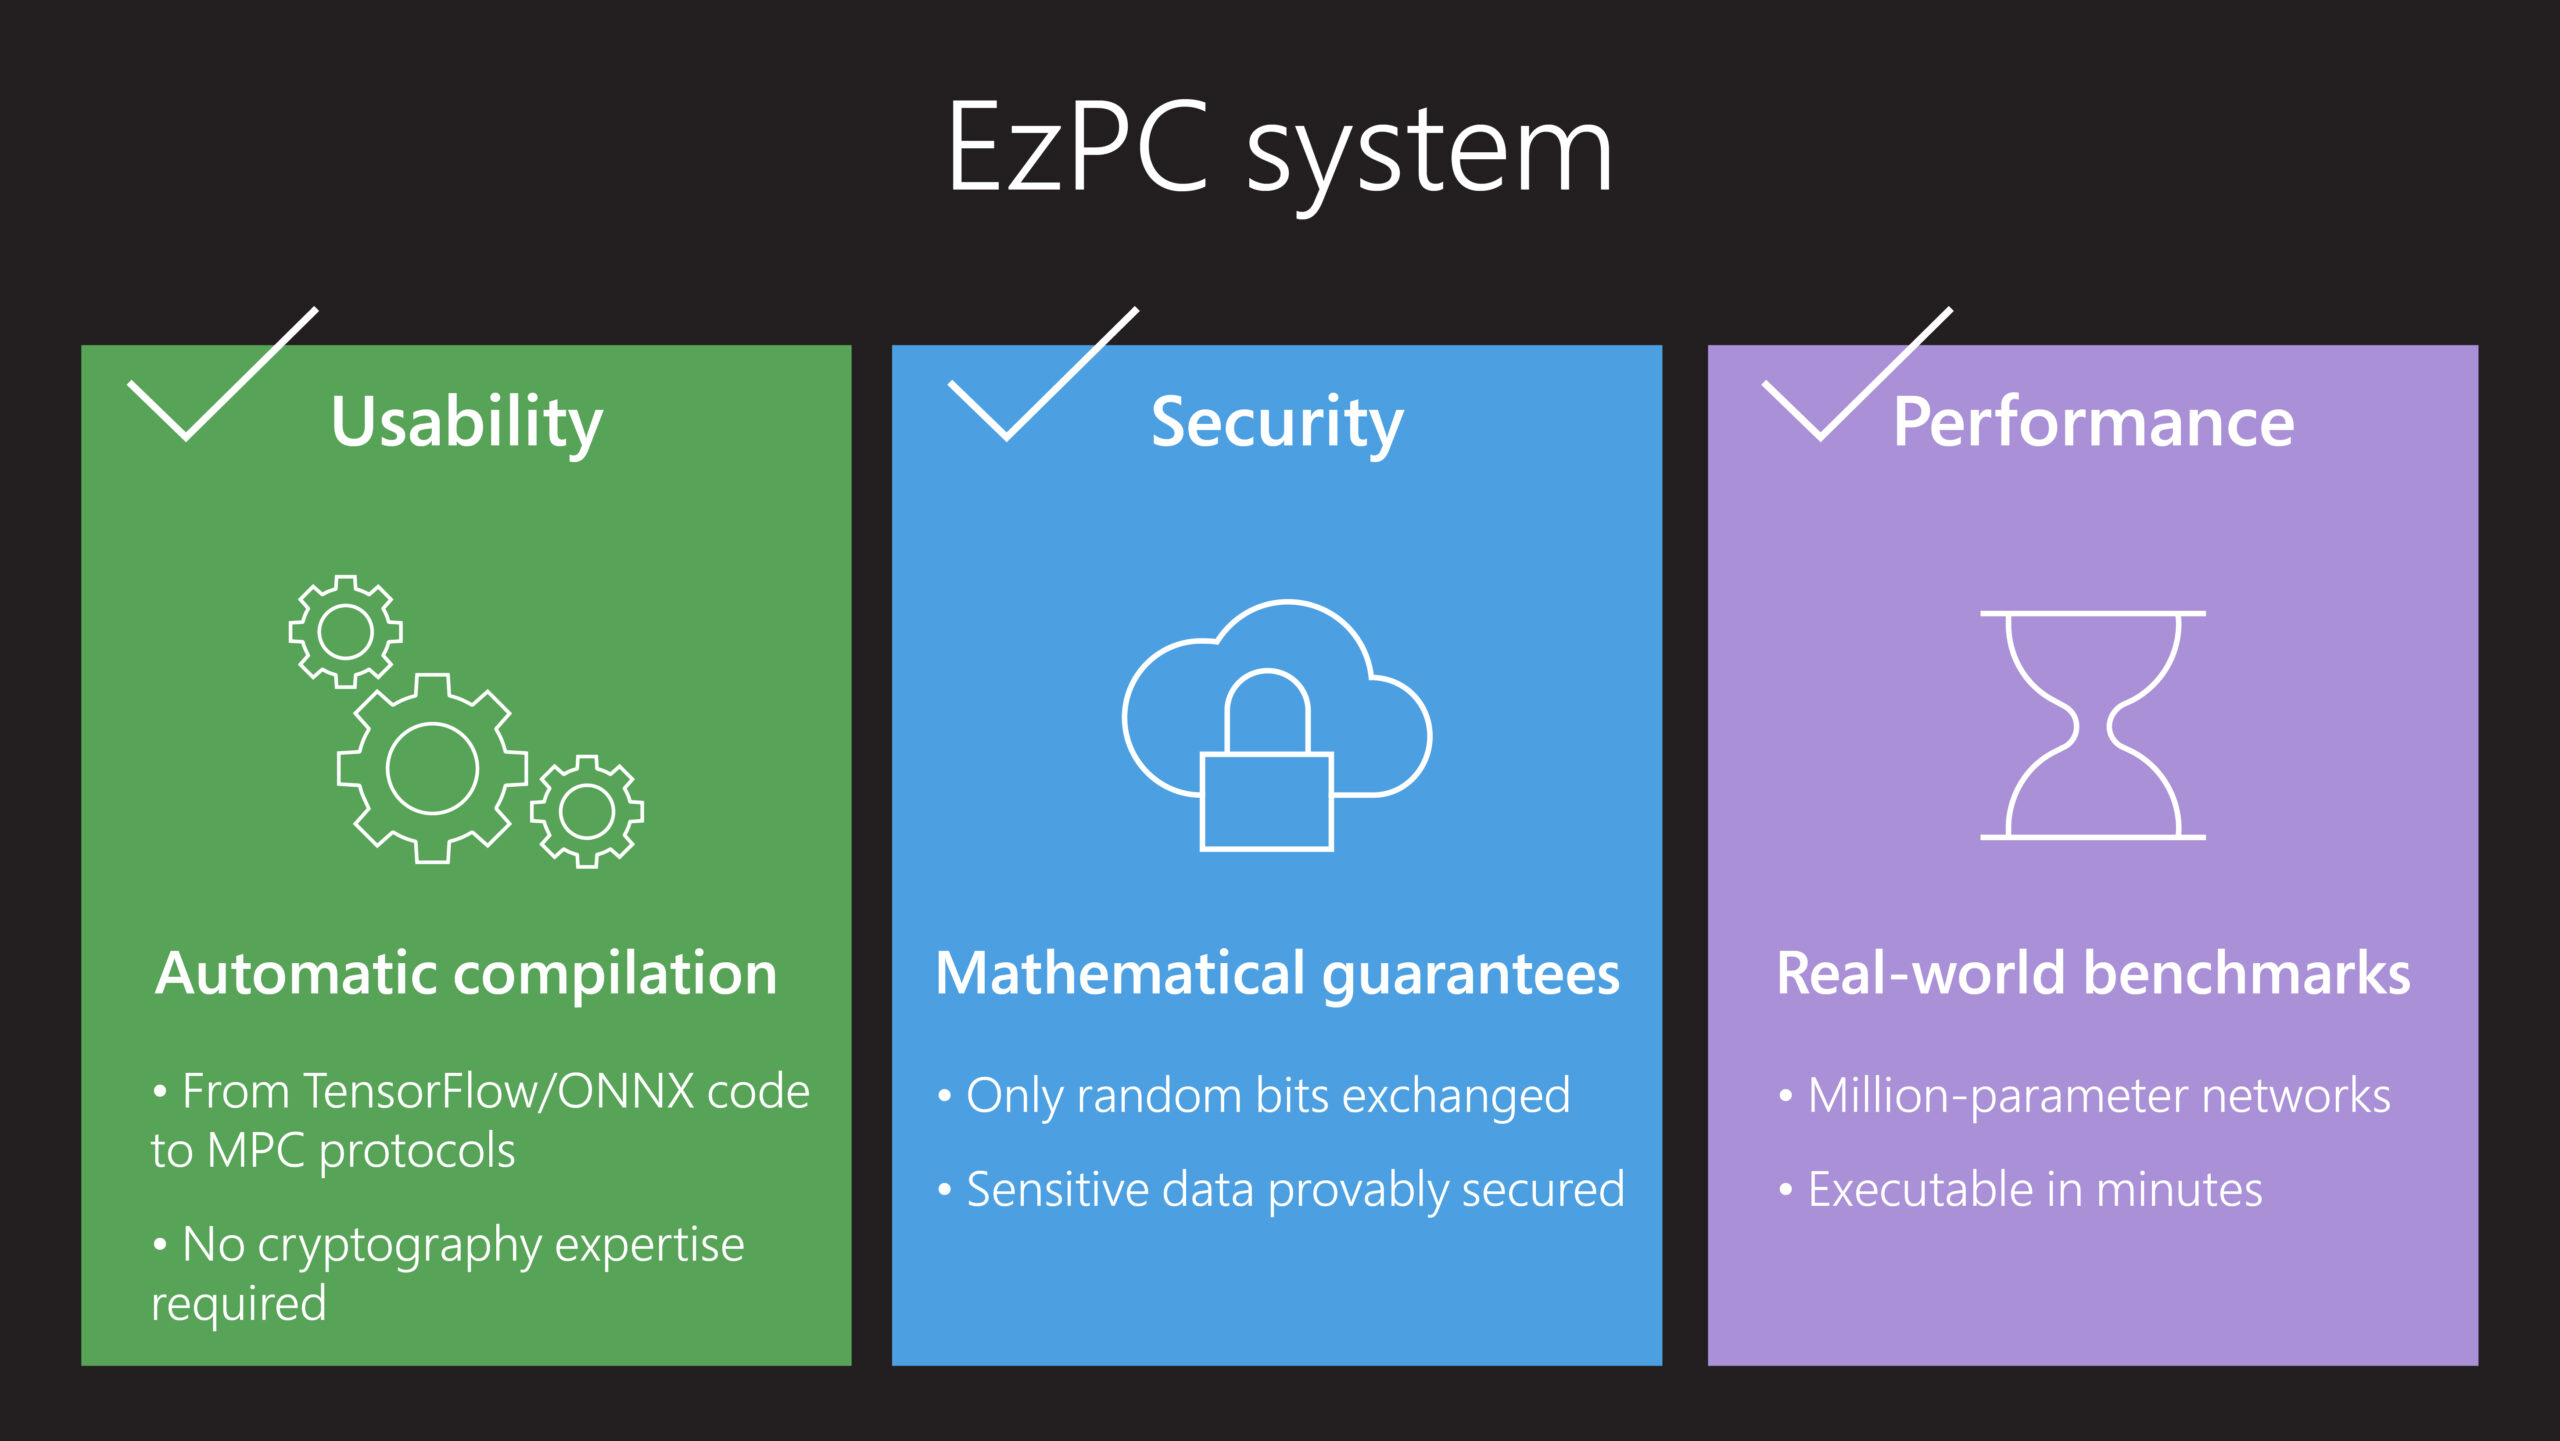  The EzPC system provides usability, security, and performance. Regarding usability, EzPC provides automatic compilations from TensorFlow or ONNX code to MPC protocols. Also, no cryptography expertise is required. Regarding security, mathematical guarantees ensure that only random bits are exchanged, and sensitive data is demonstrably secured. Regarding performance, real-world benchmarks show that EzPC can run on million-parameter networks and is executable in minutes.